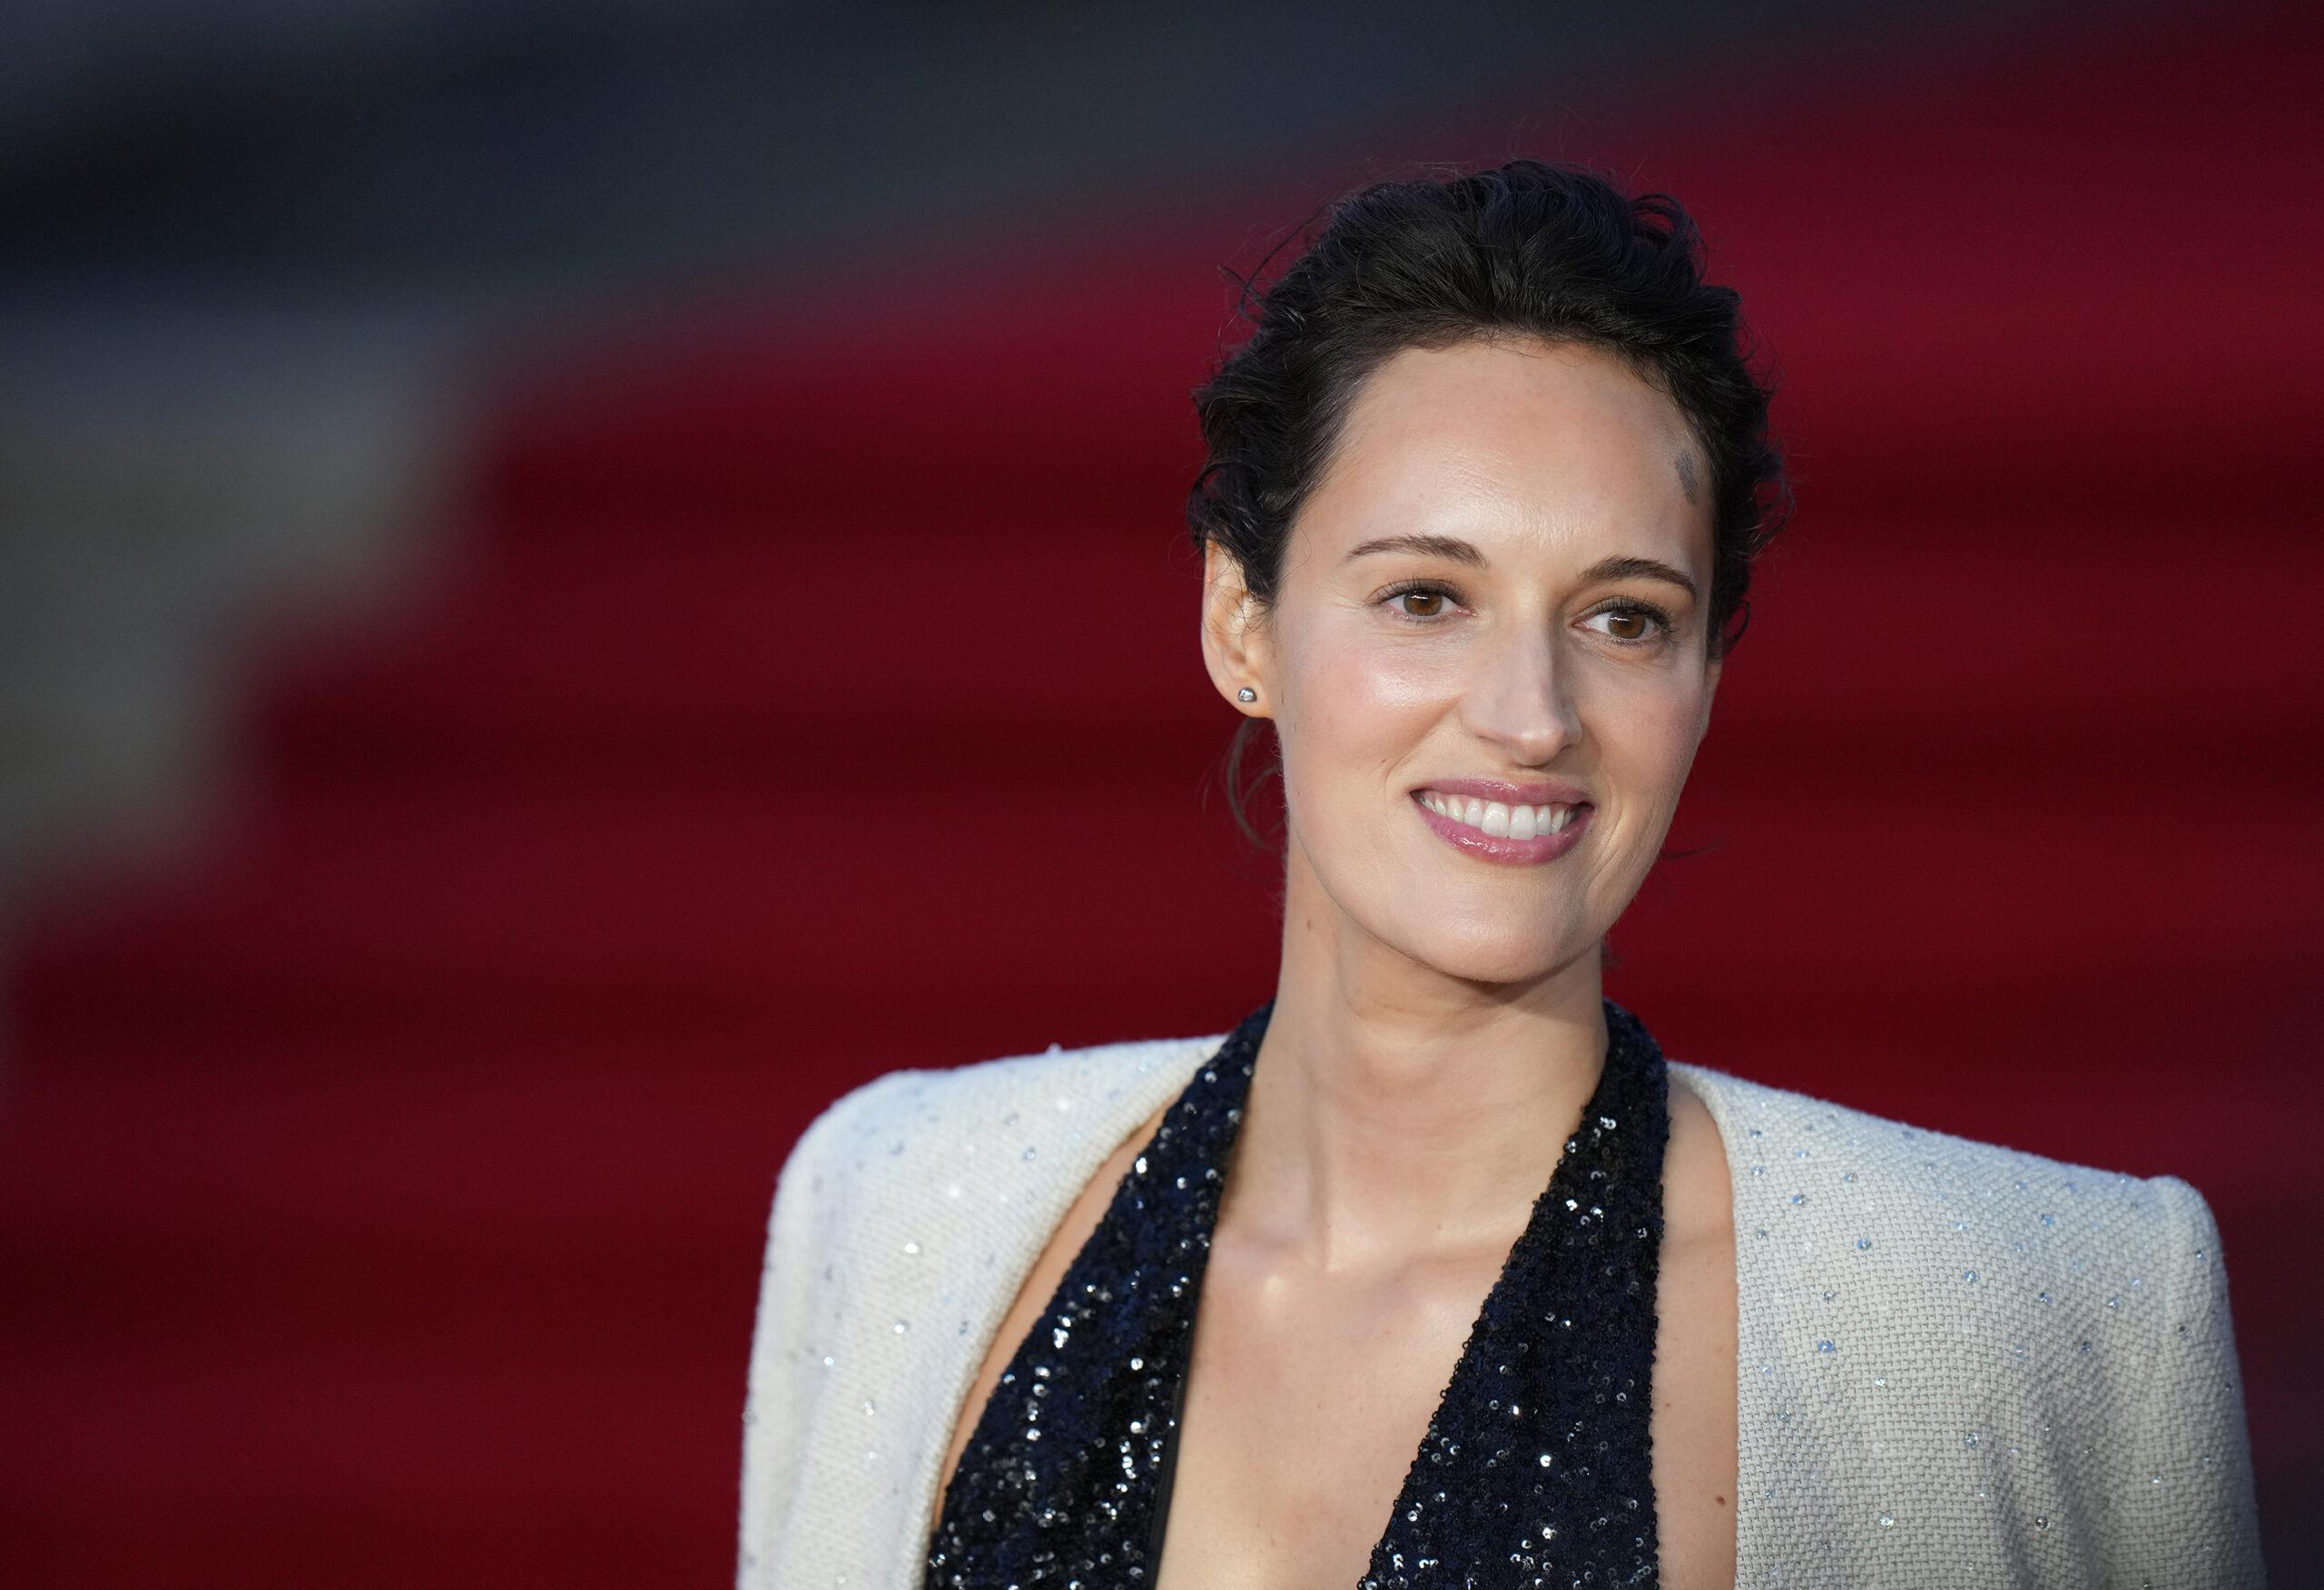 Phoebe Waller-Bridge at the The World Premiere of No Time to Die 